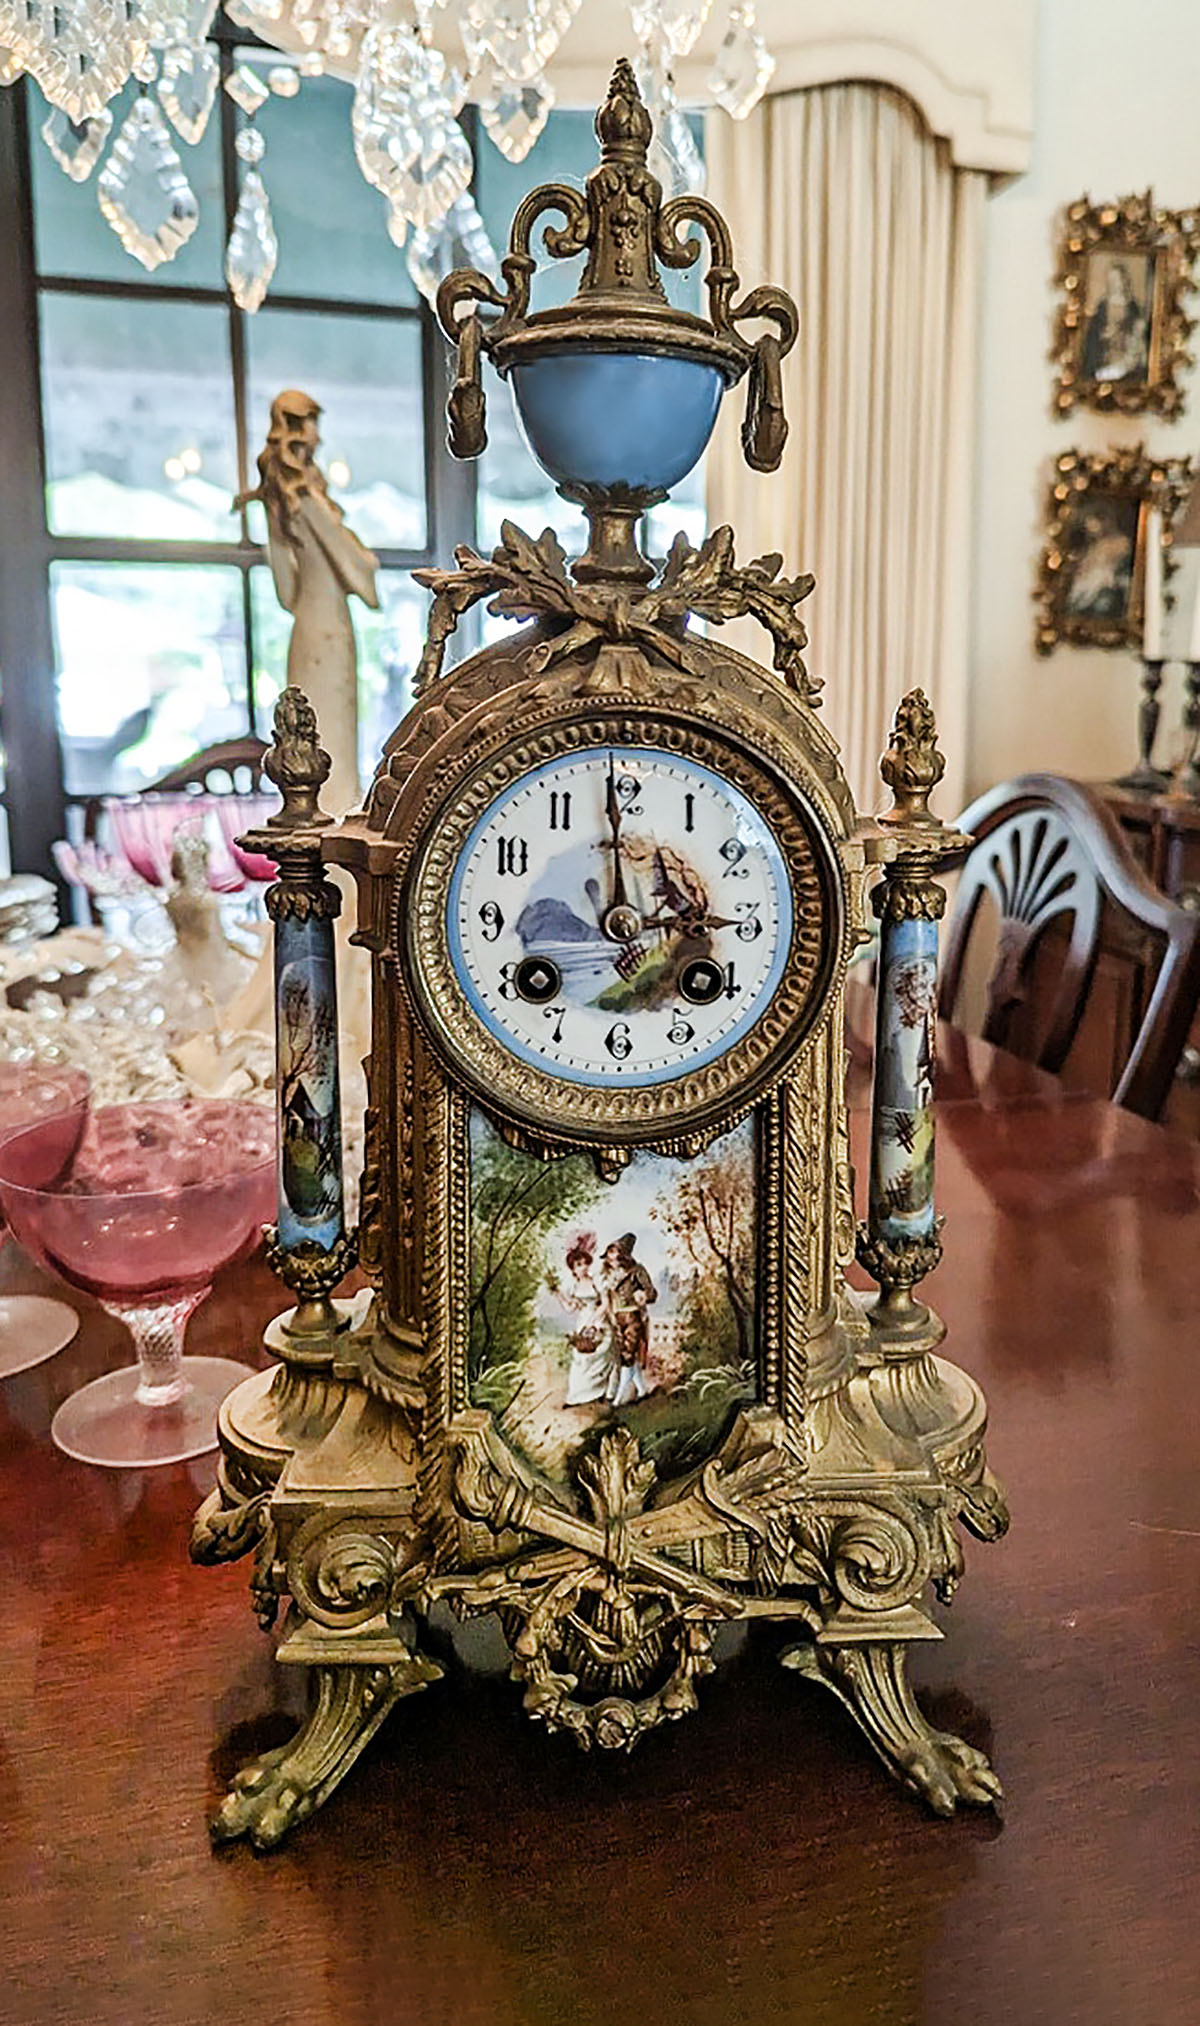 DECORATED PORCELAIN AND BRONZE CLOCK: